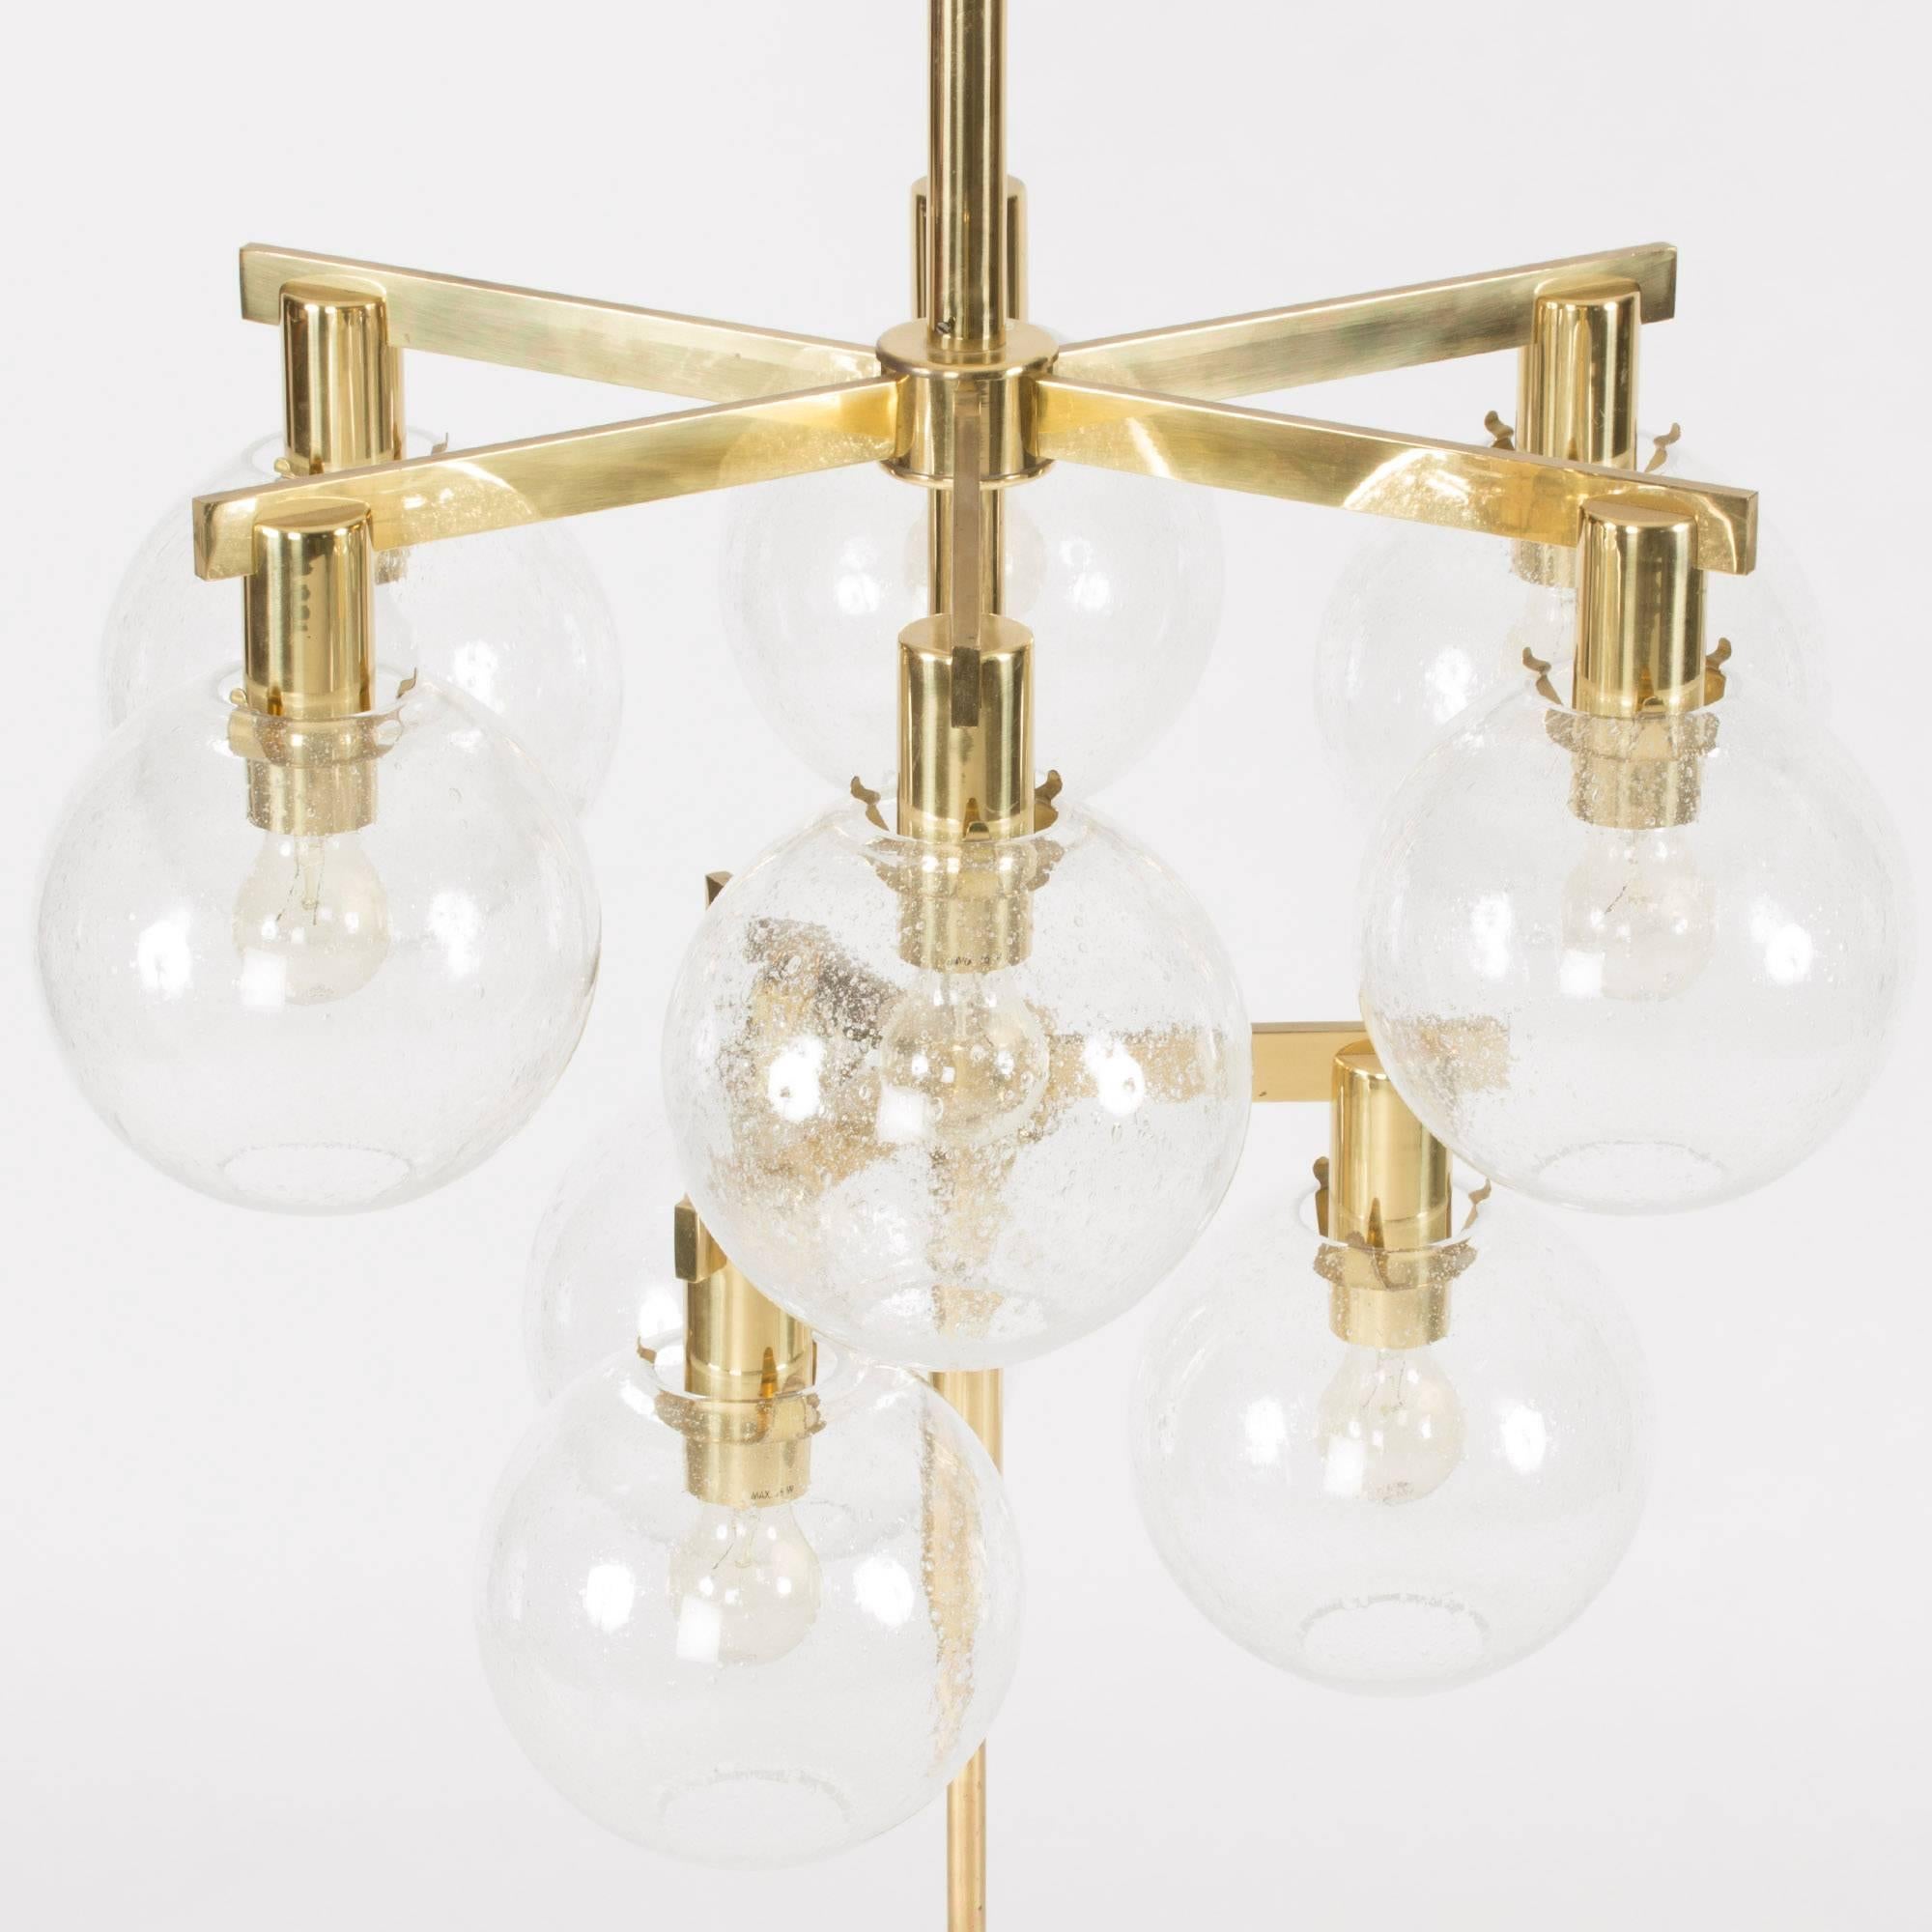 Swedish Brass and Glass Chandelier by Hans-Agne Jakobsson